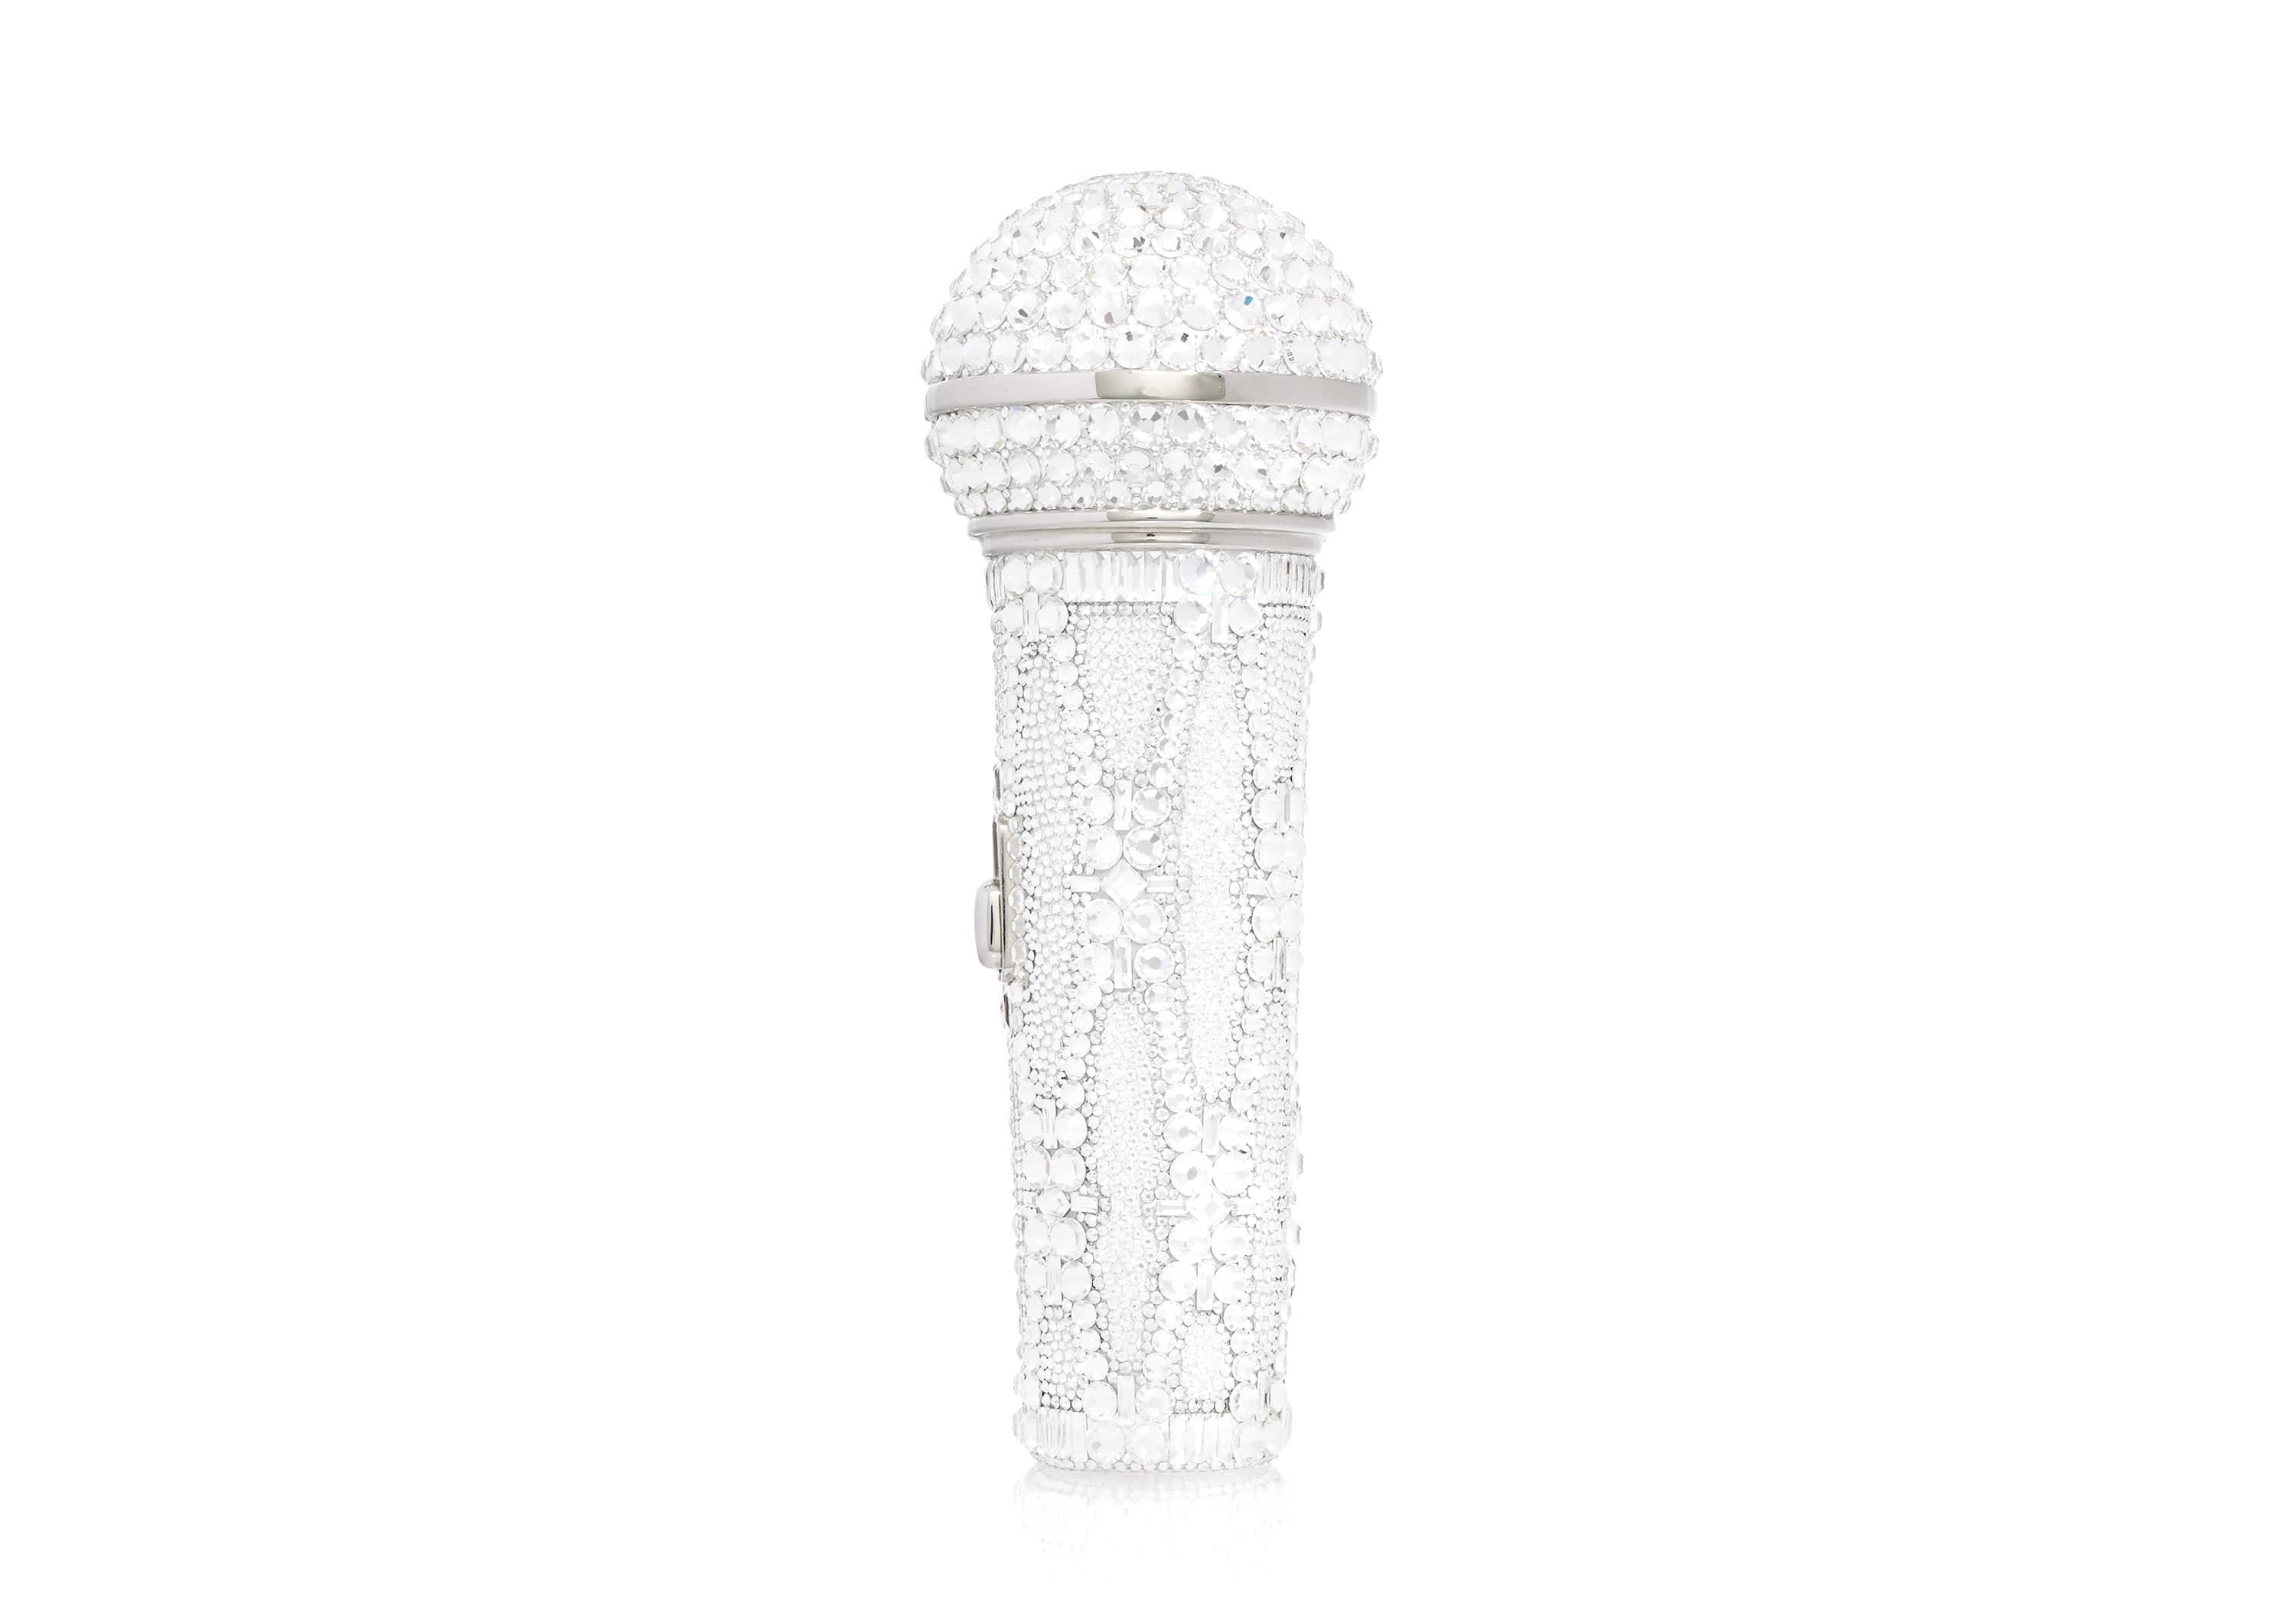 Judith Leiber Couture Diva Microphone Crystal Clutch Bag | Judith leiber  couture, Clutch bag, Crystal clutch